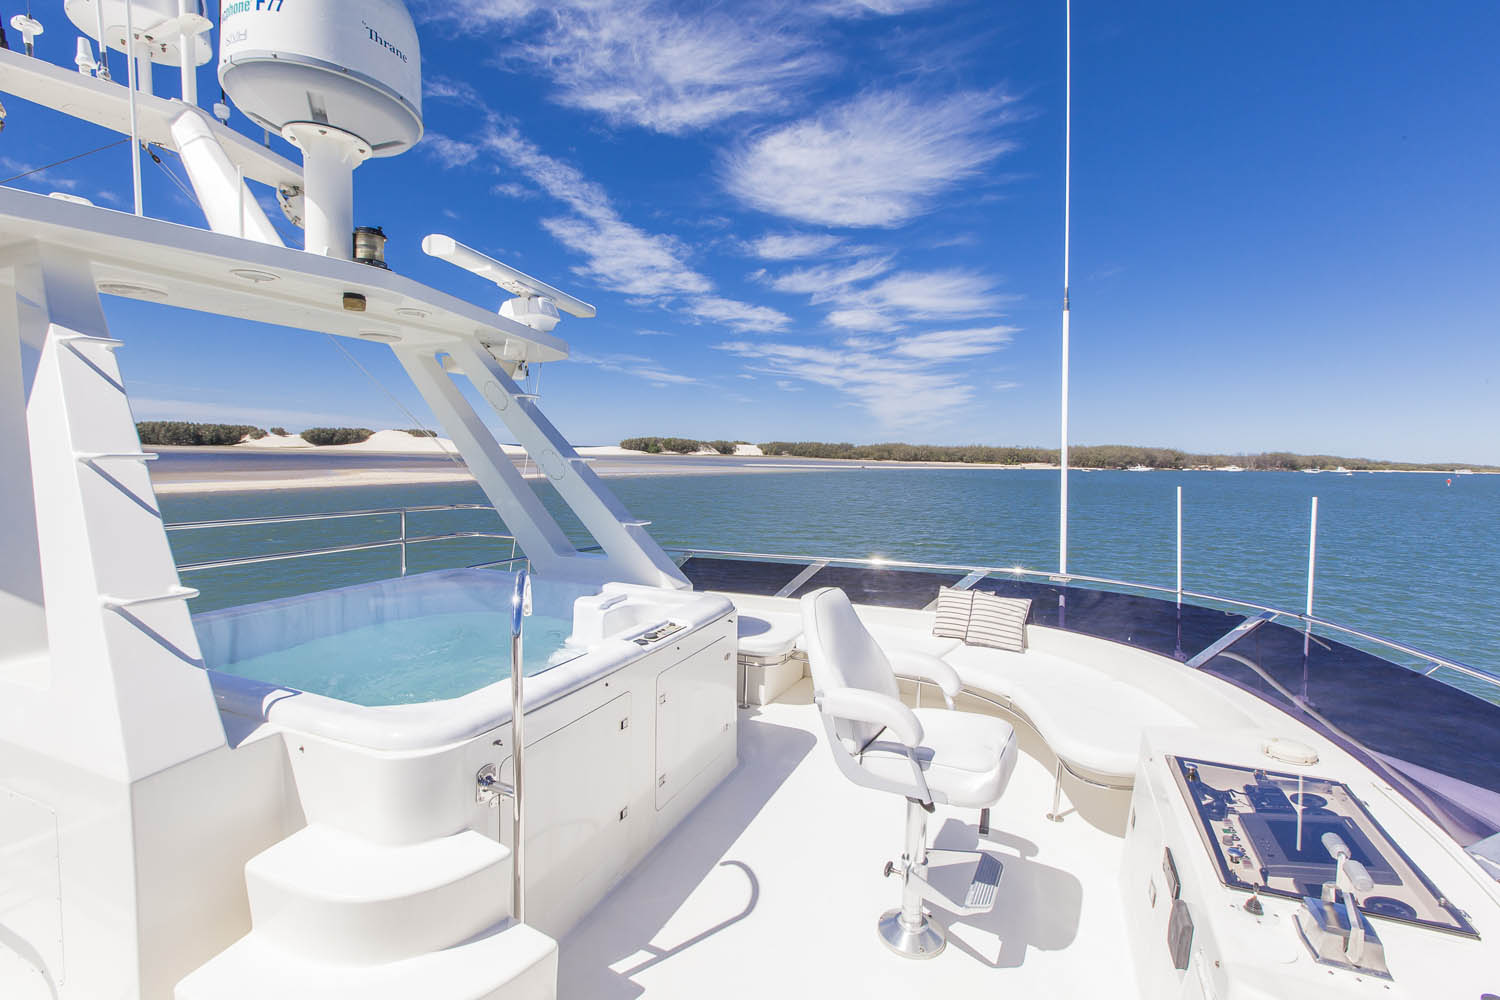 M/Y Silent World II yacht for sale top deck with hot tub